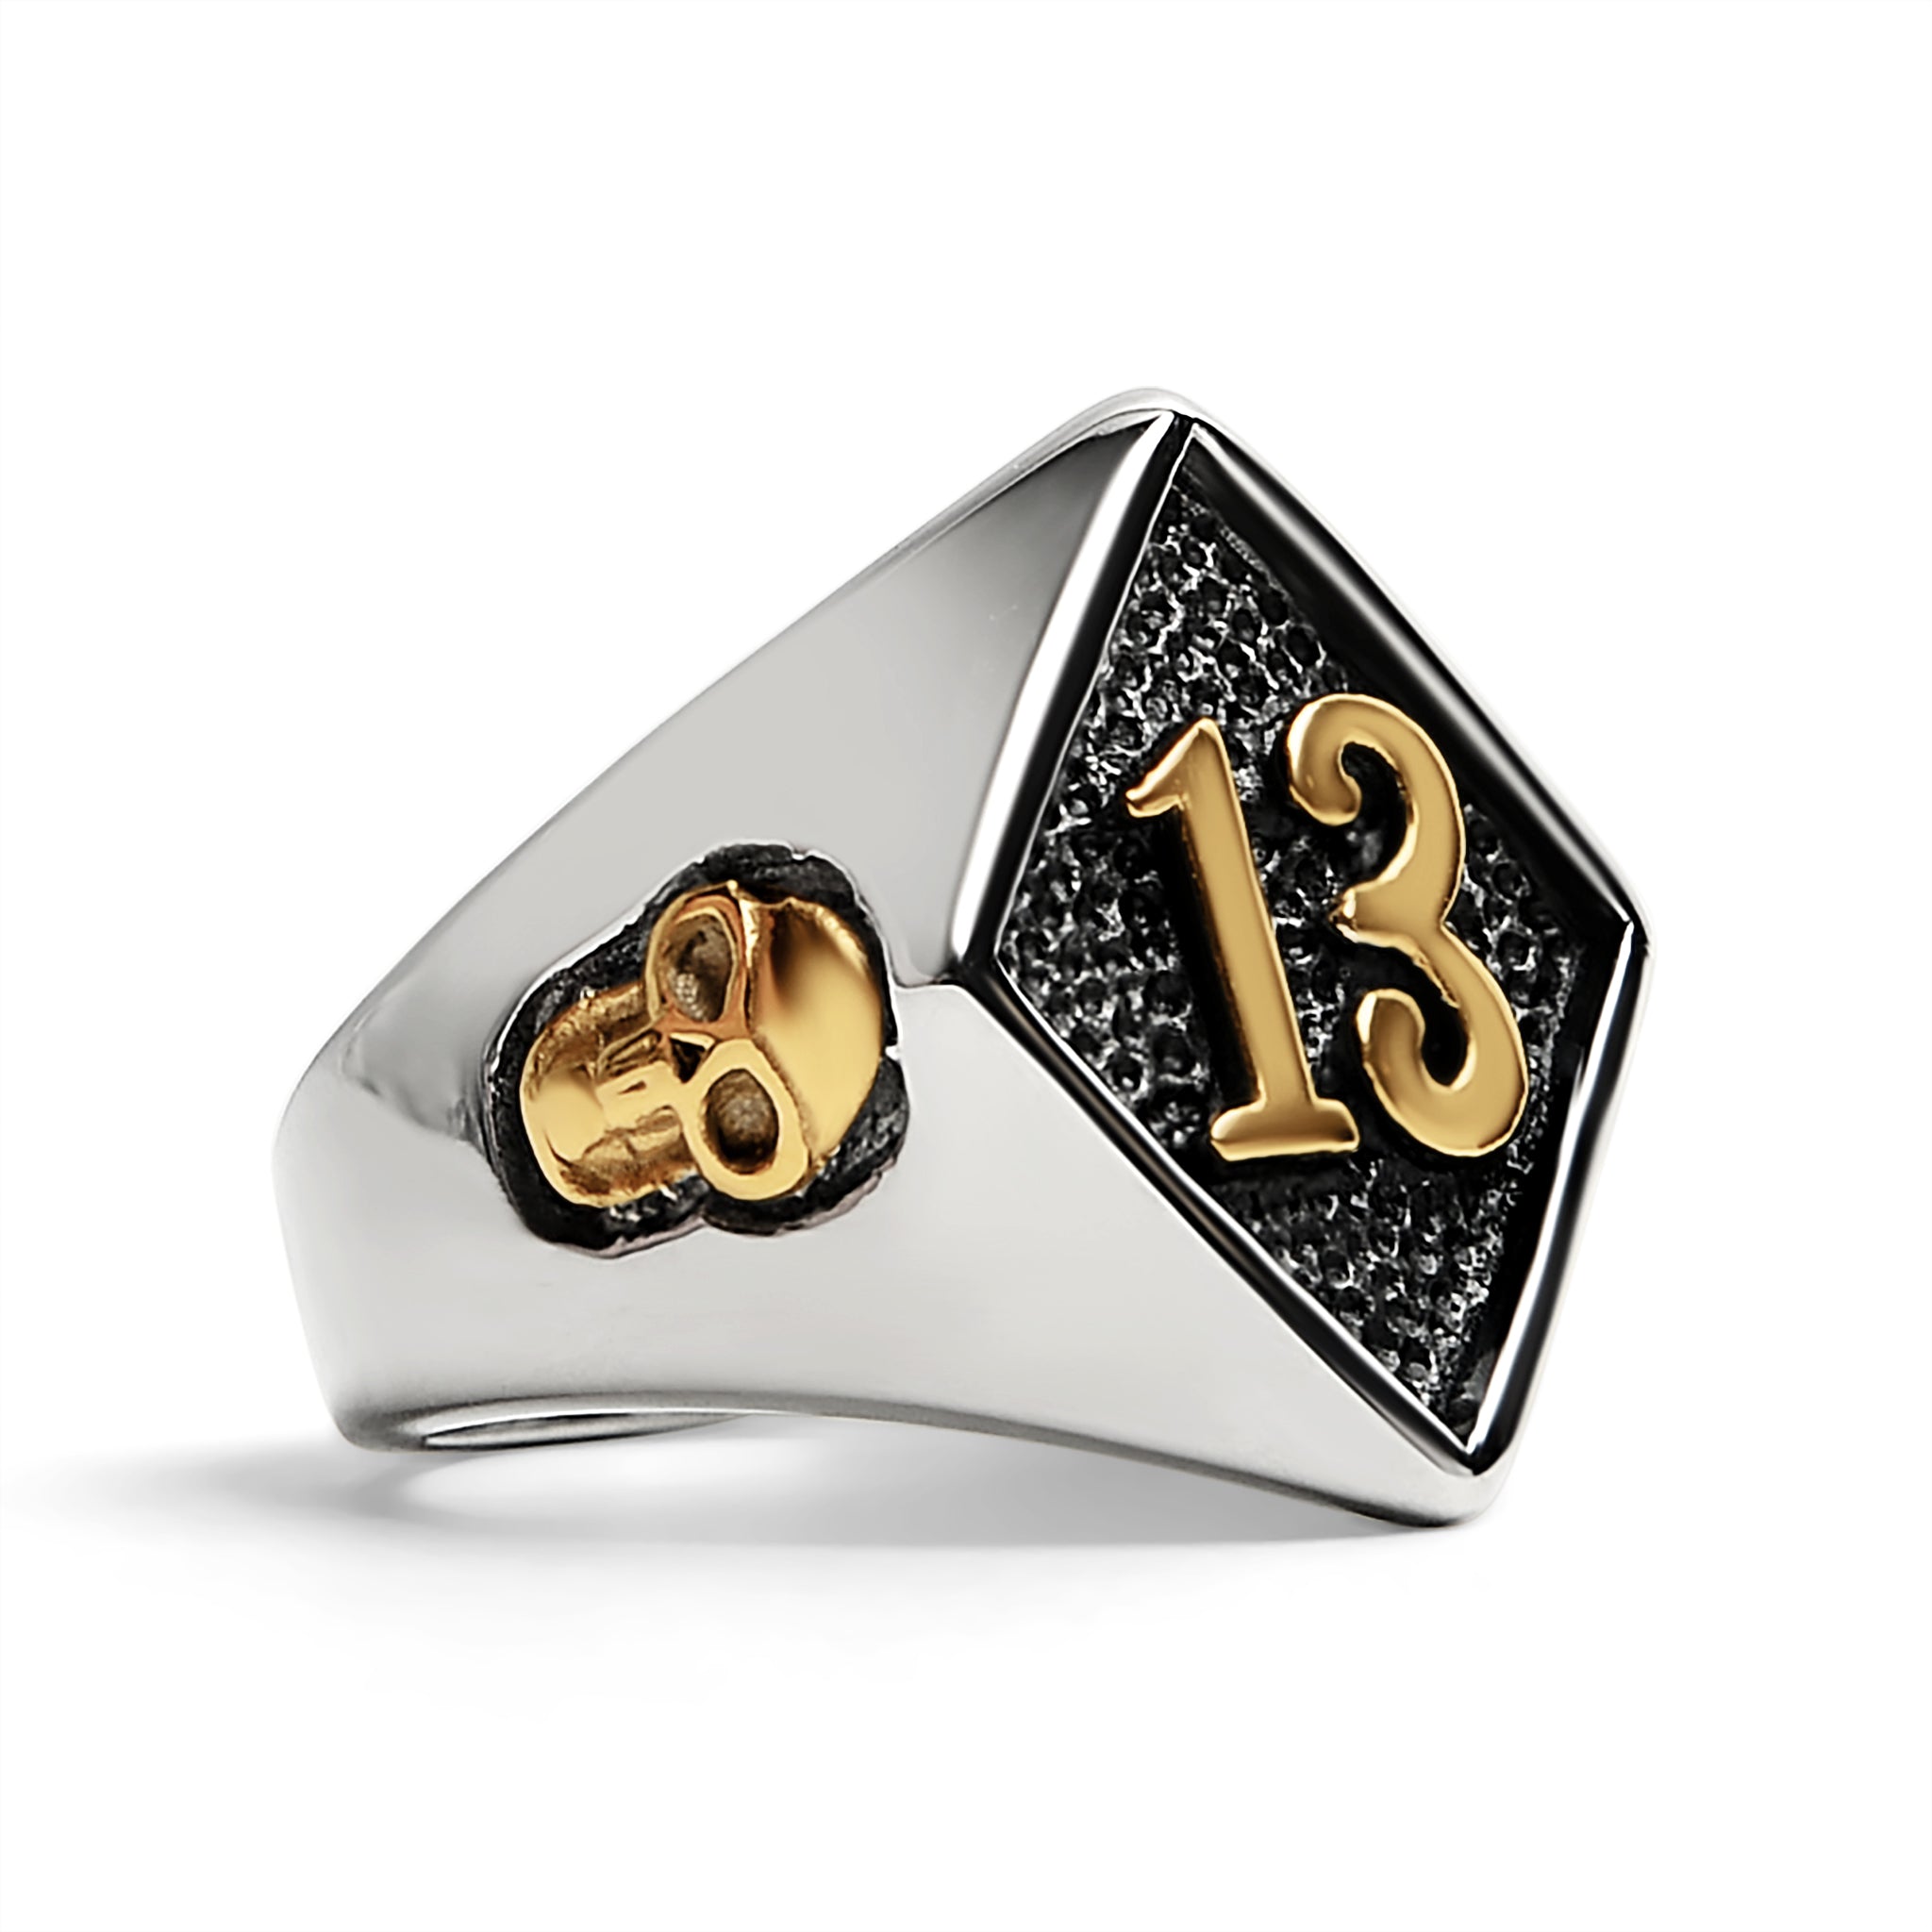 Stainless Steel 18K Gold PVD Coated Accents "13" and Skulls Signet Ring / SCR3042